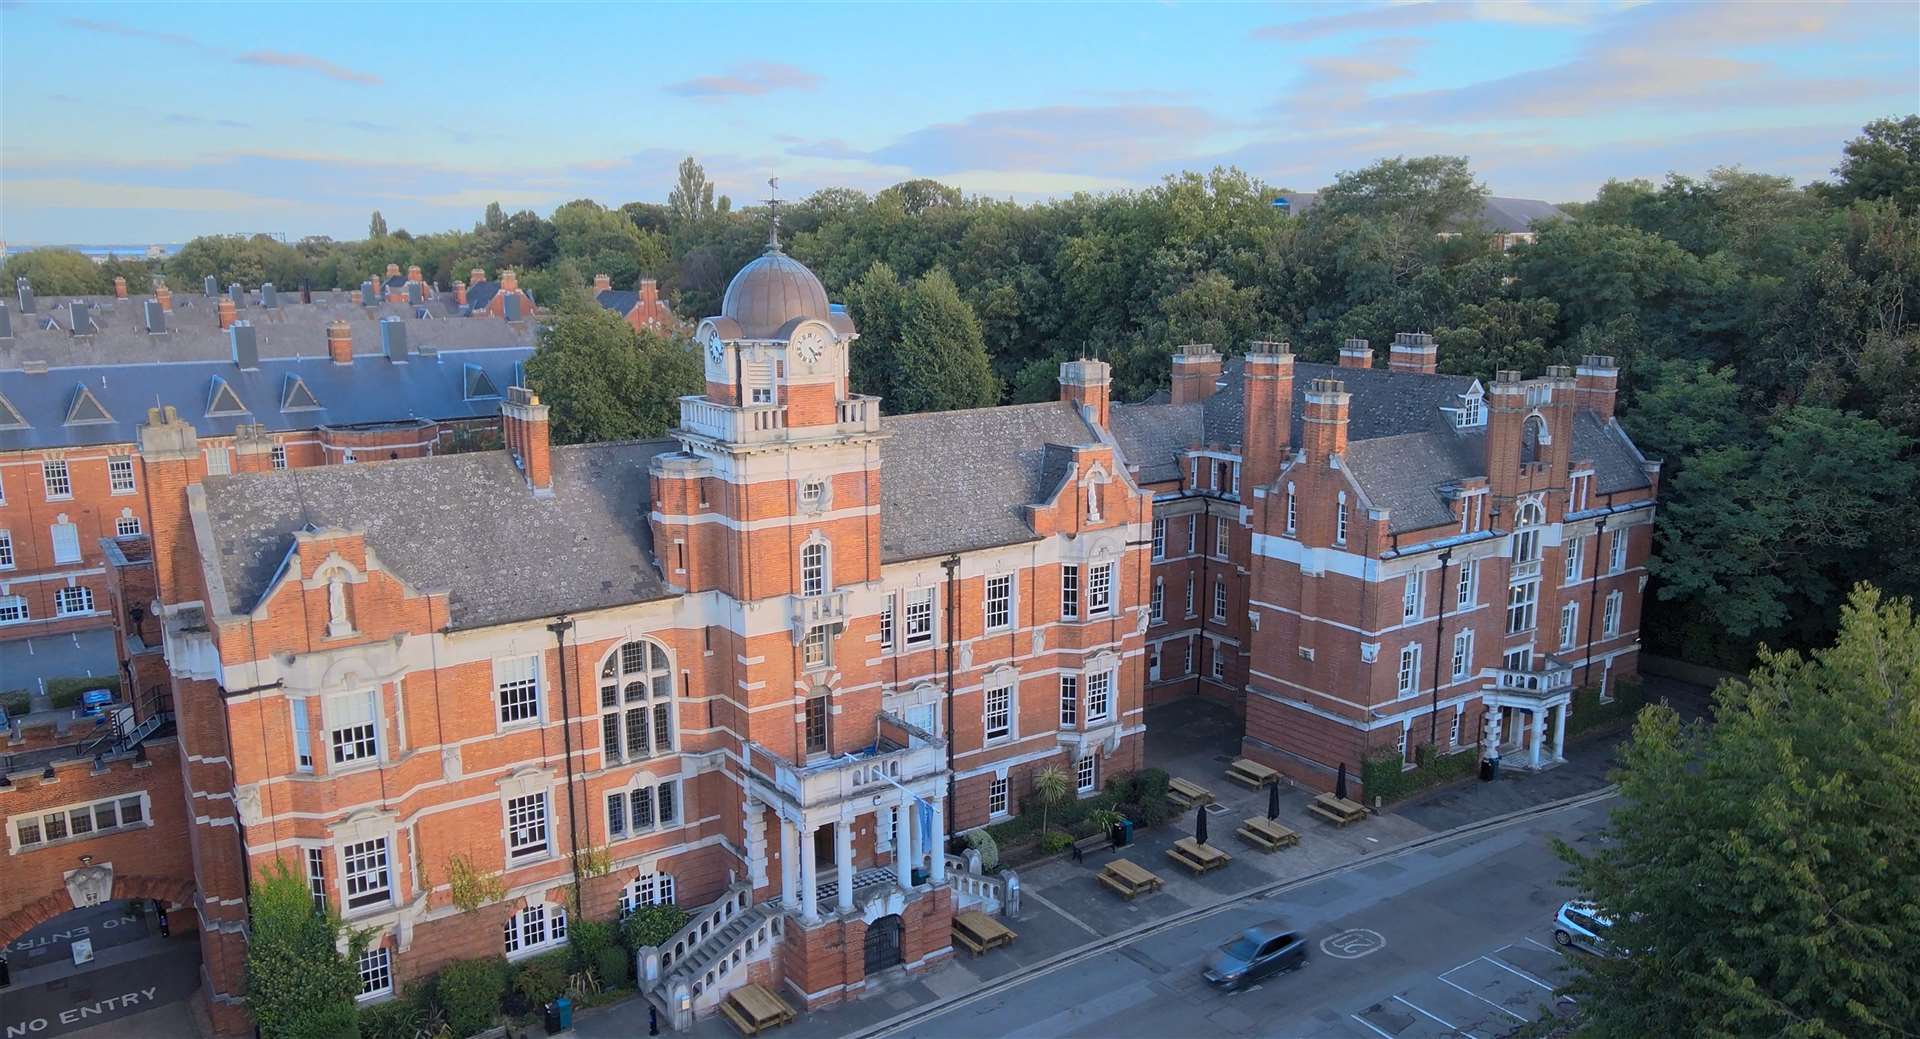 The new midwifery course will be at the University of Greenwich's Medway campus in Gillingham. Photo: University of Greenwich